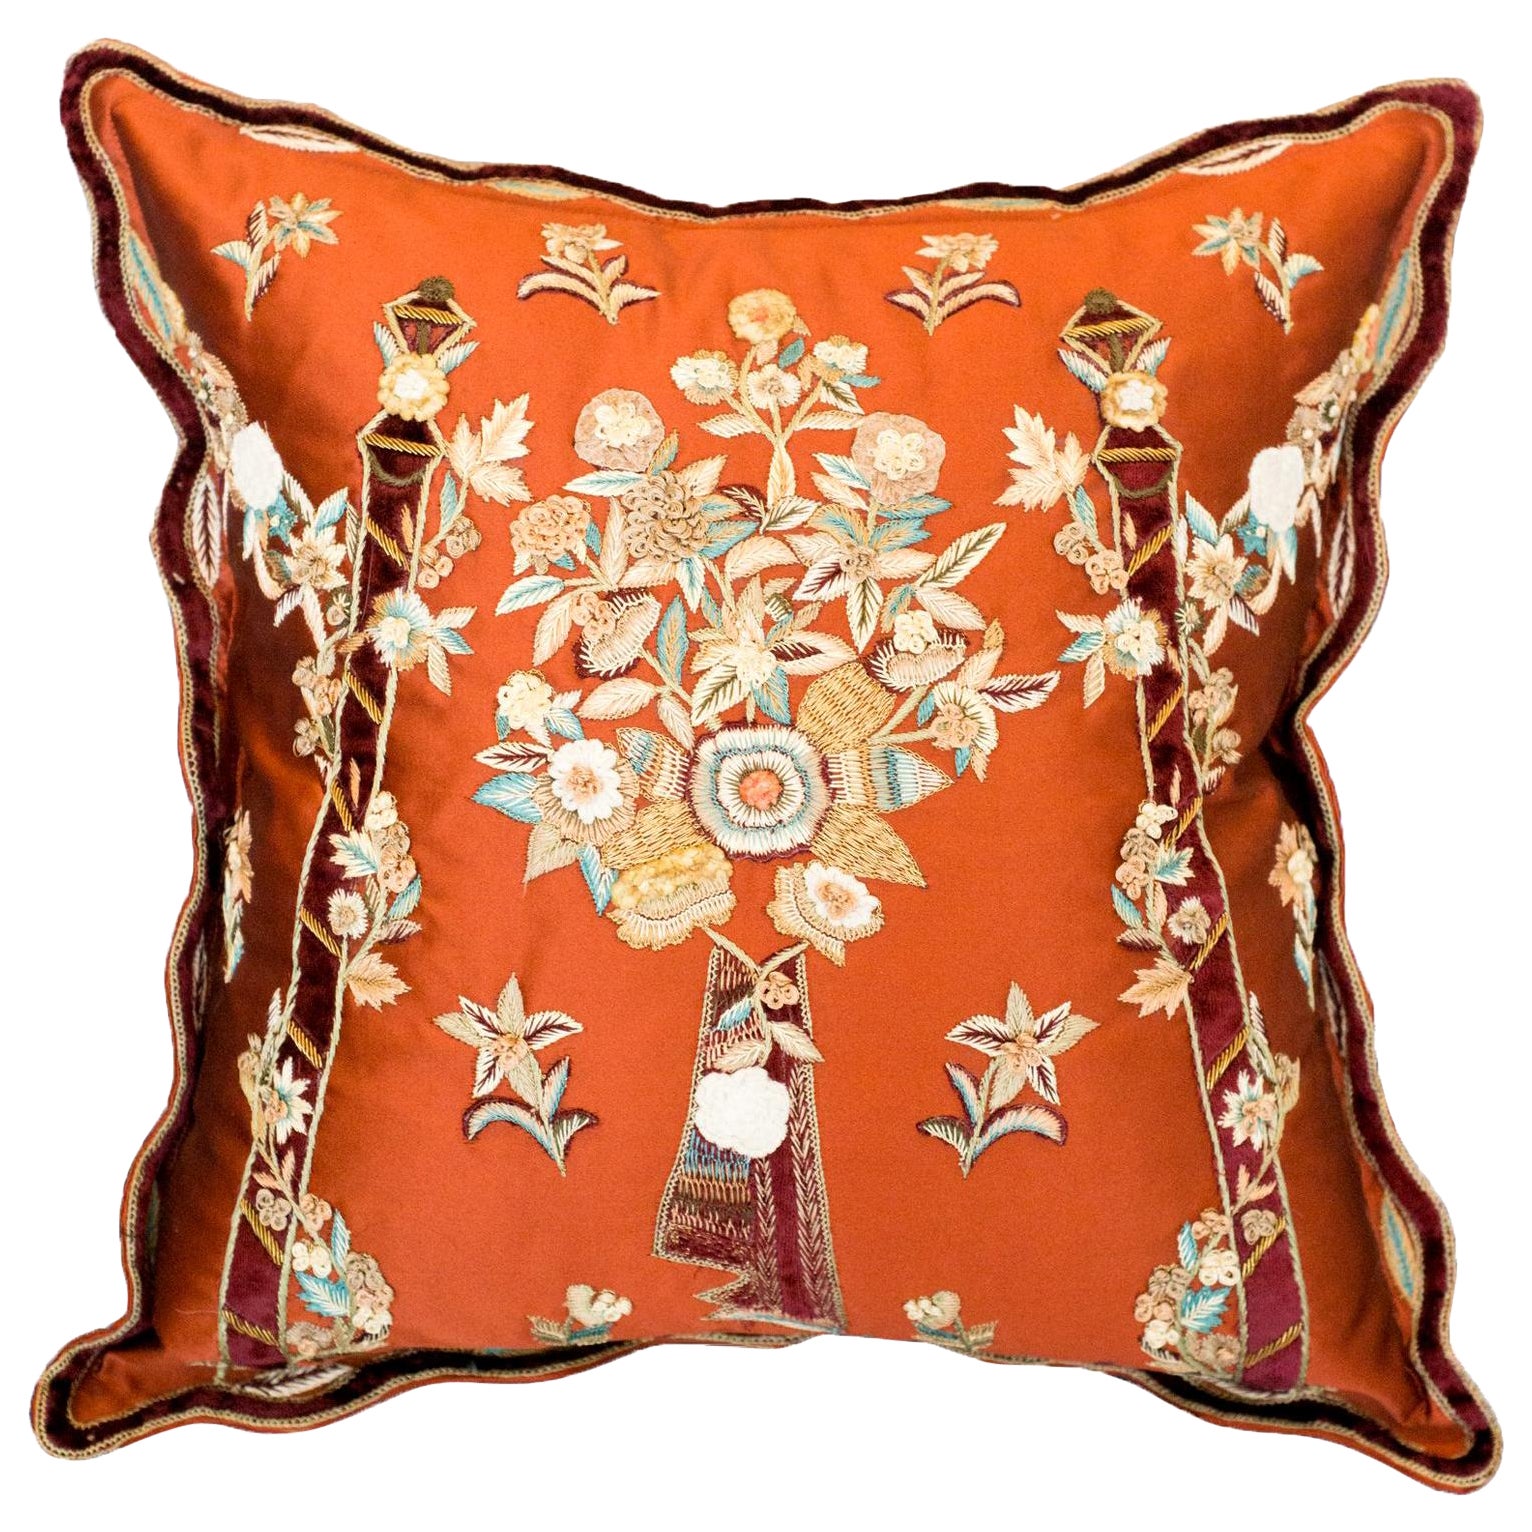 Contemporary Red Silk Pillow with Ornate Floral Embroidery